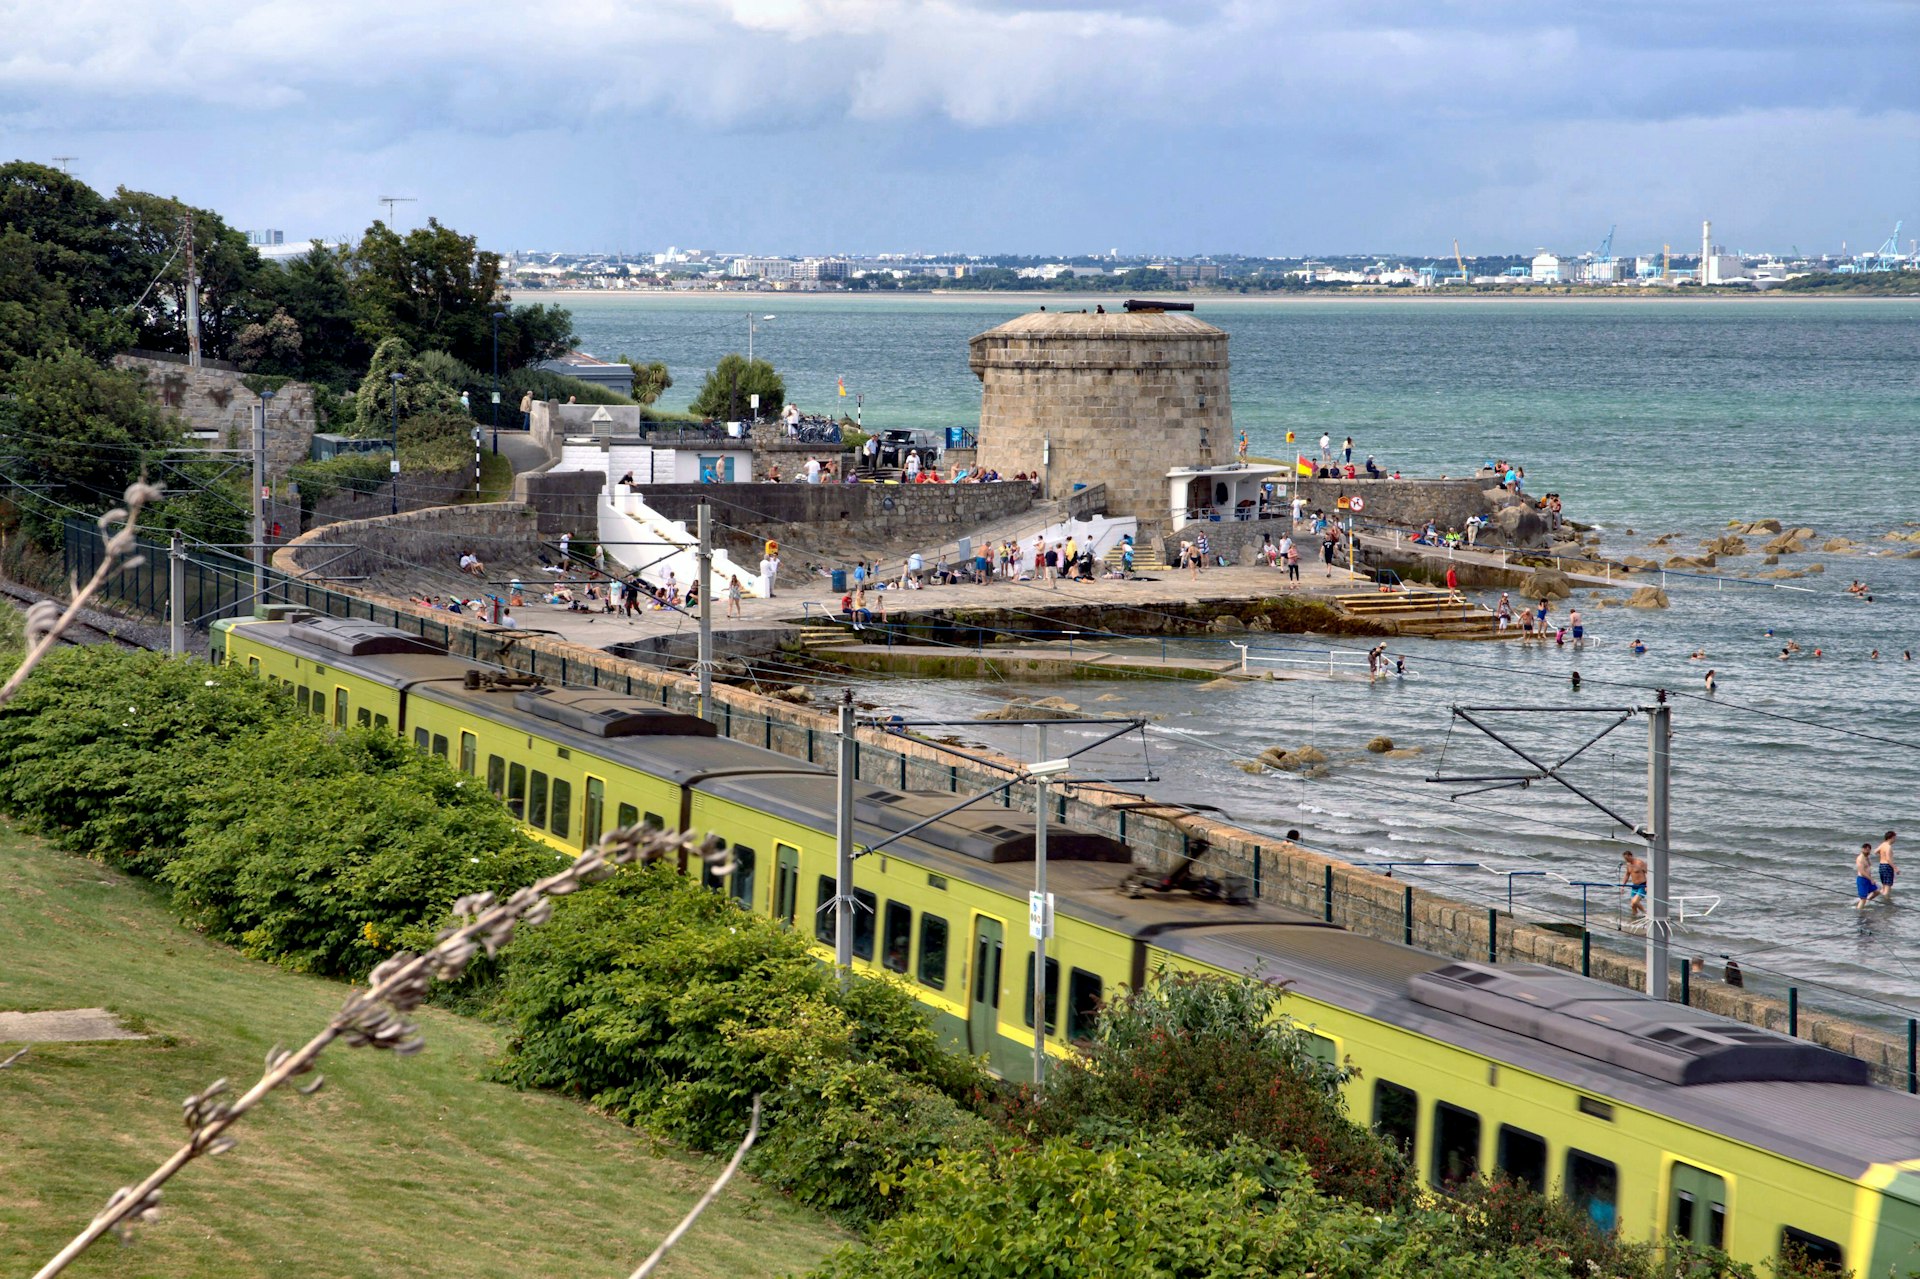 The DART train going past the beach in Dun Laoghaire, County Dublin, Ireland